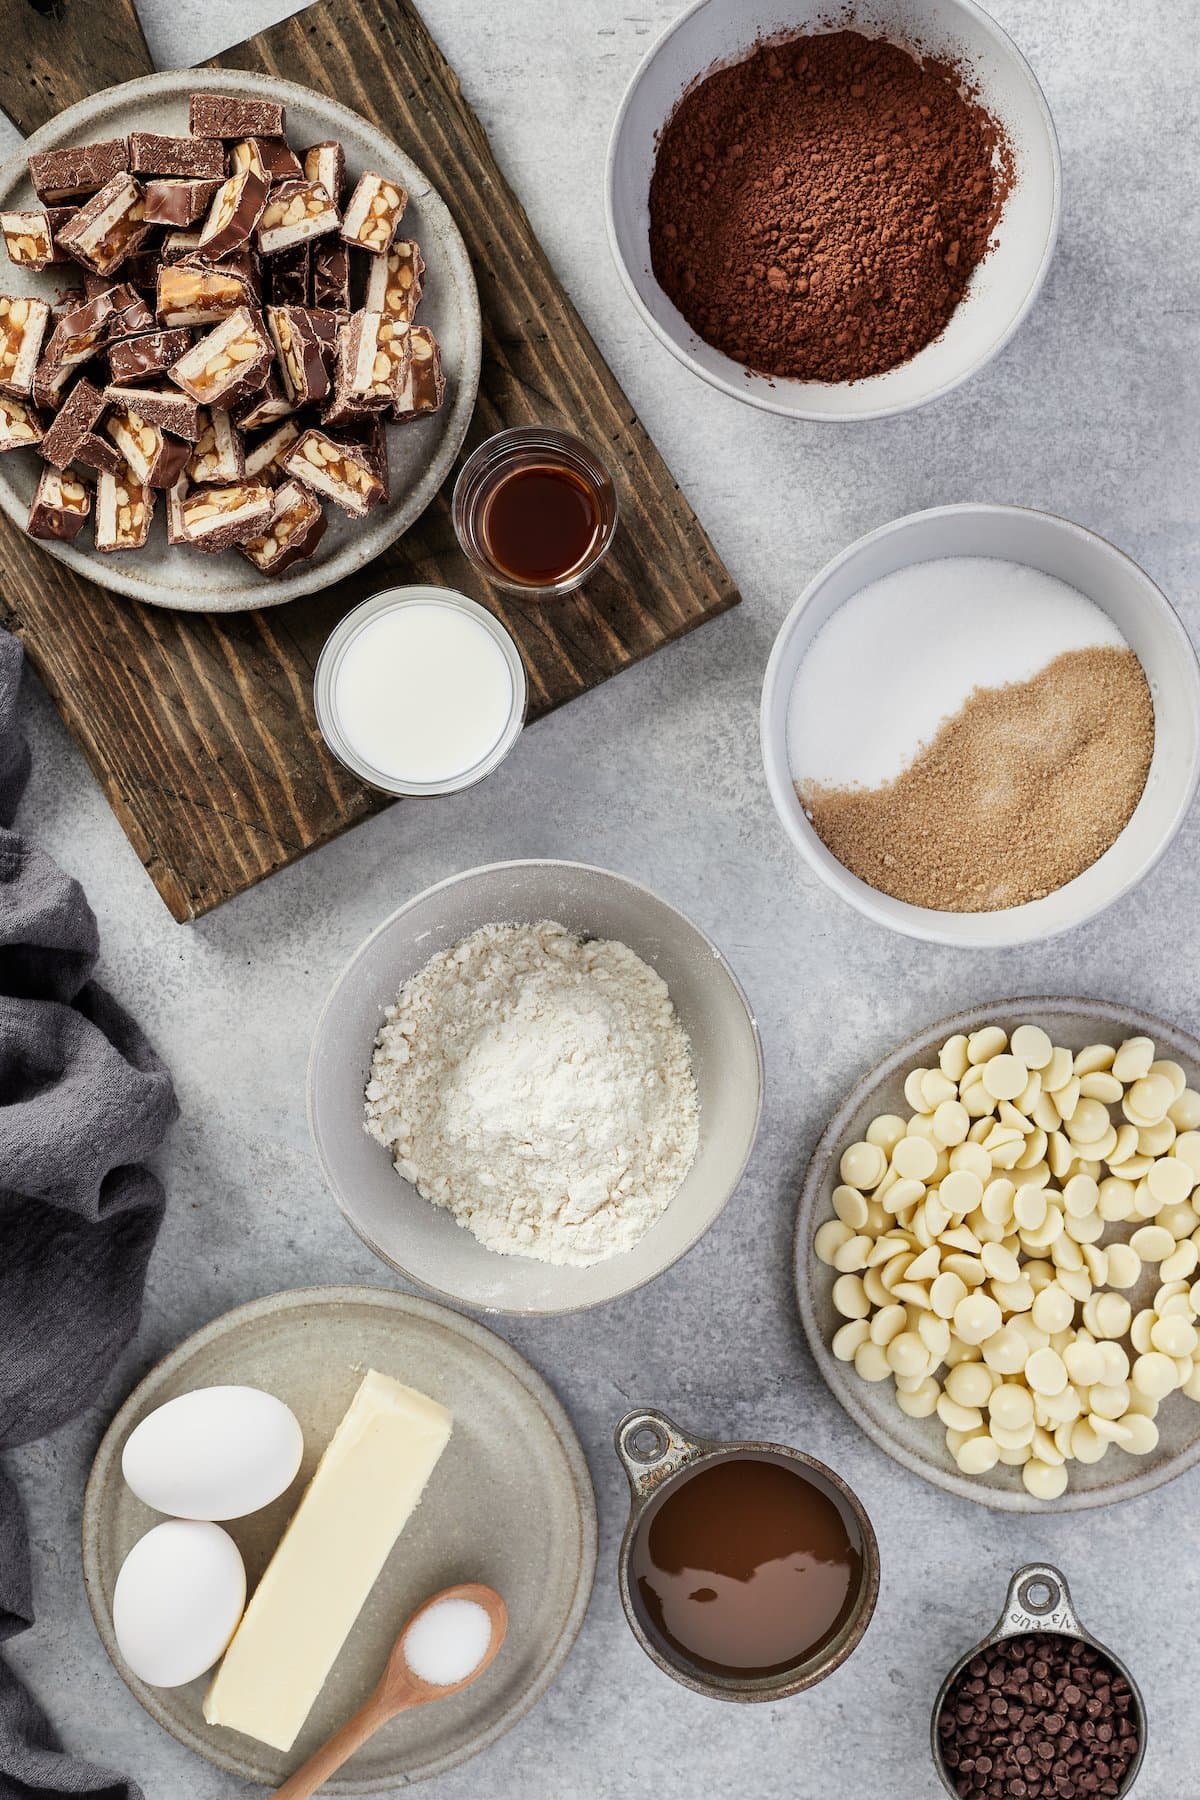 The ingredients for Snickers brownies.